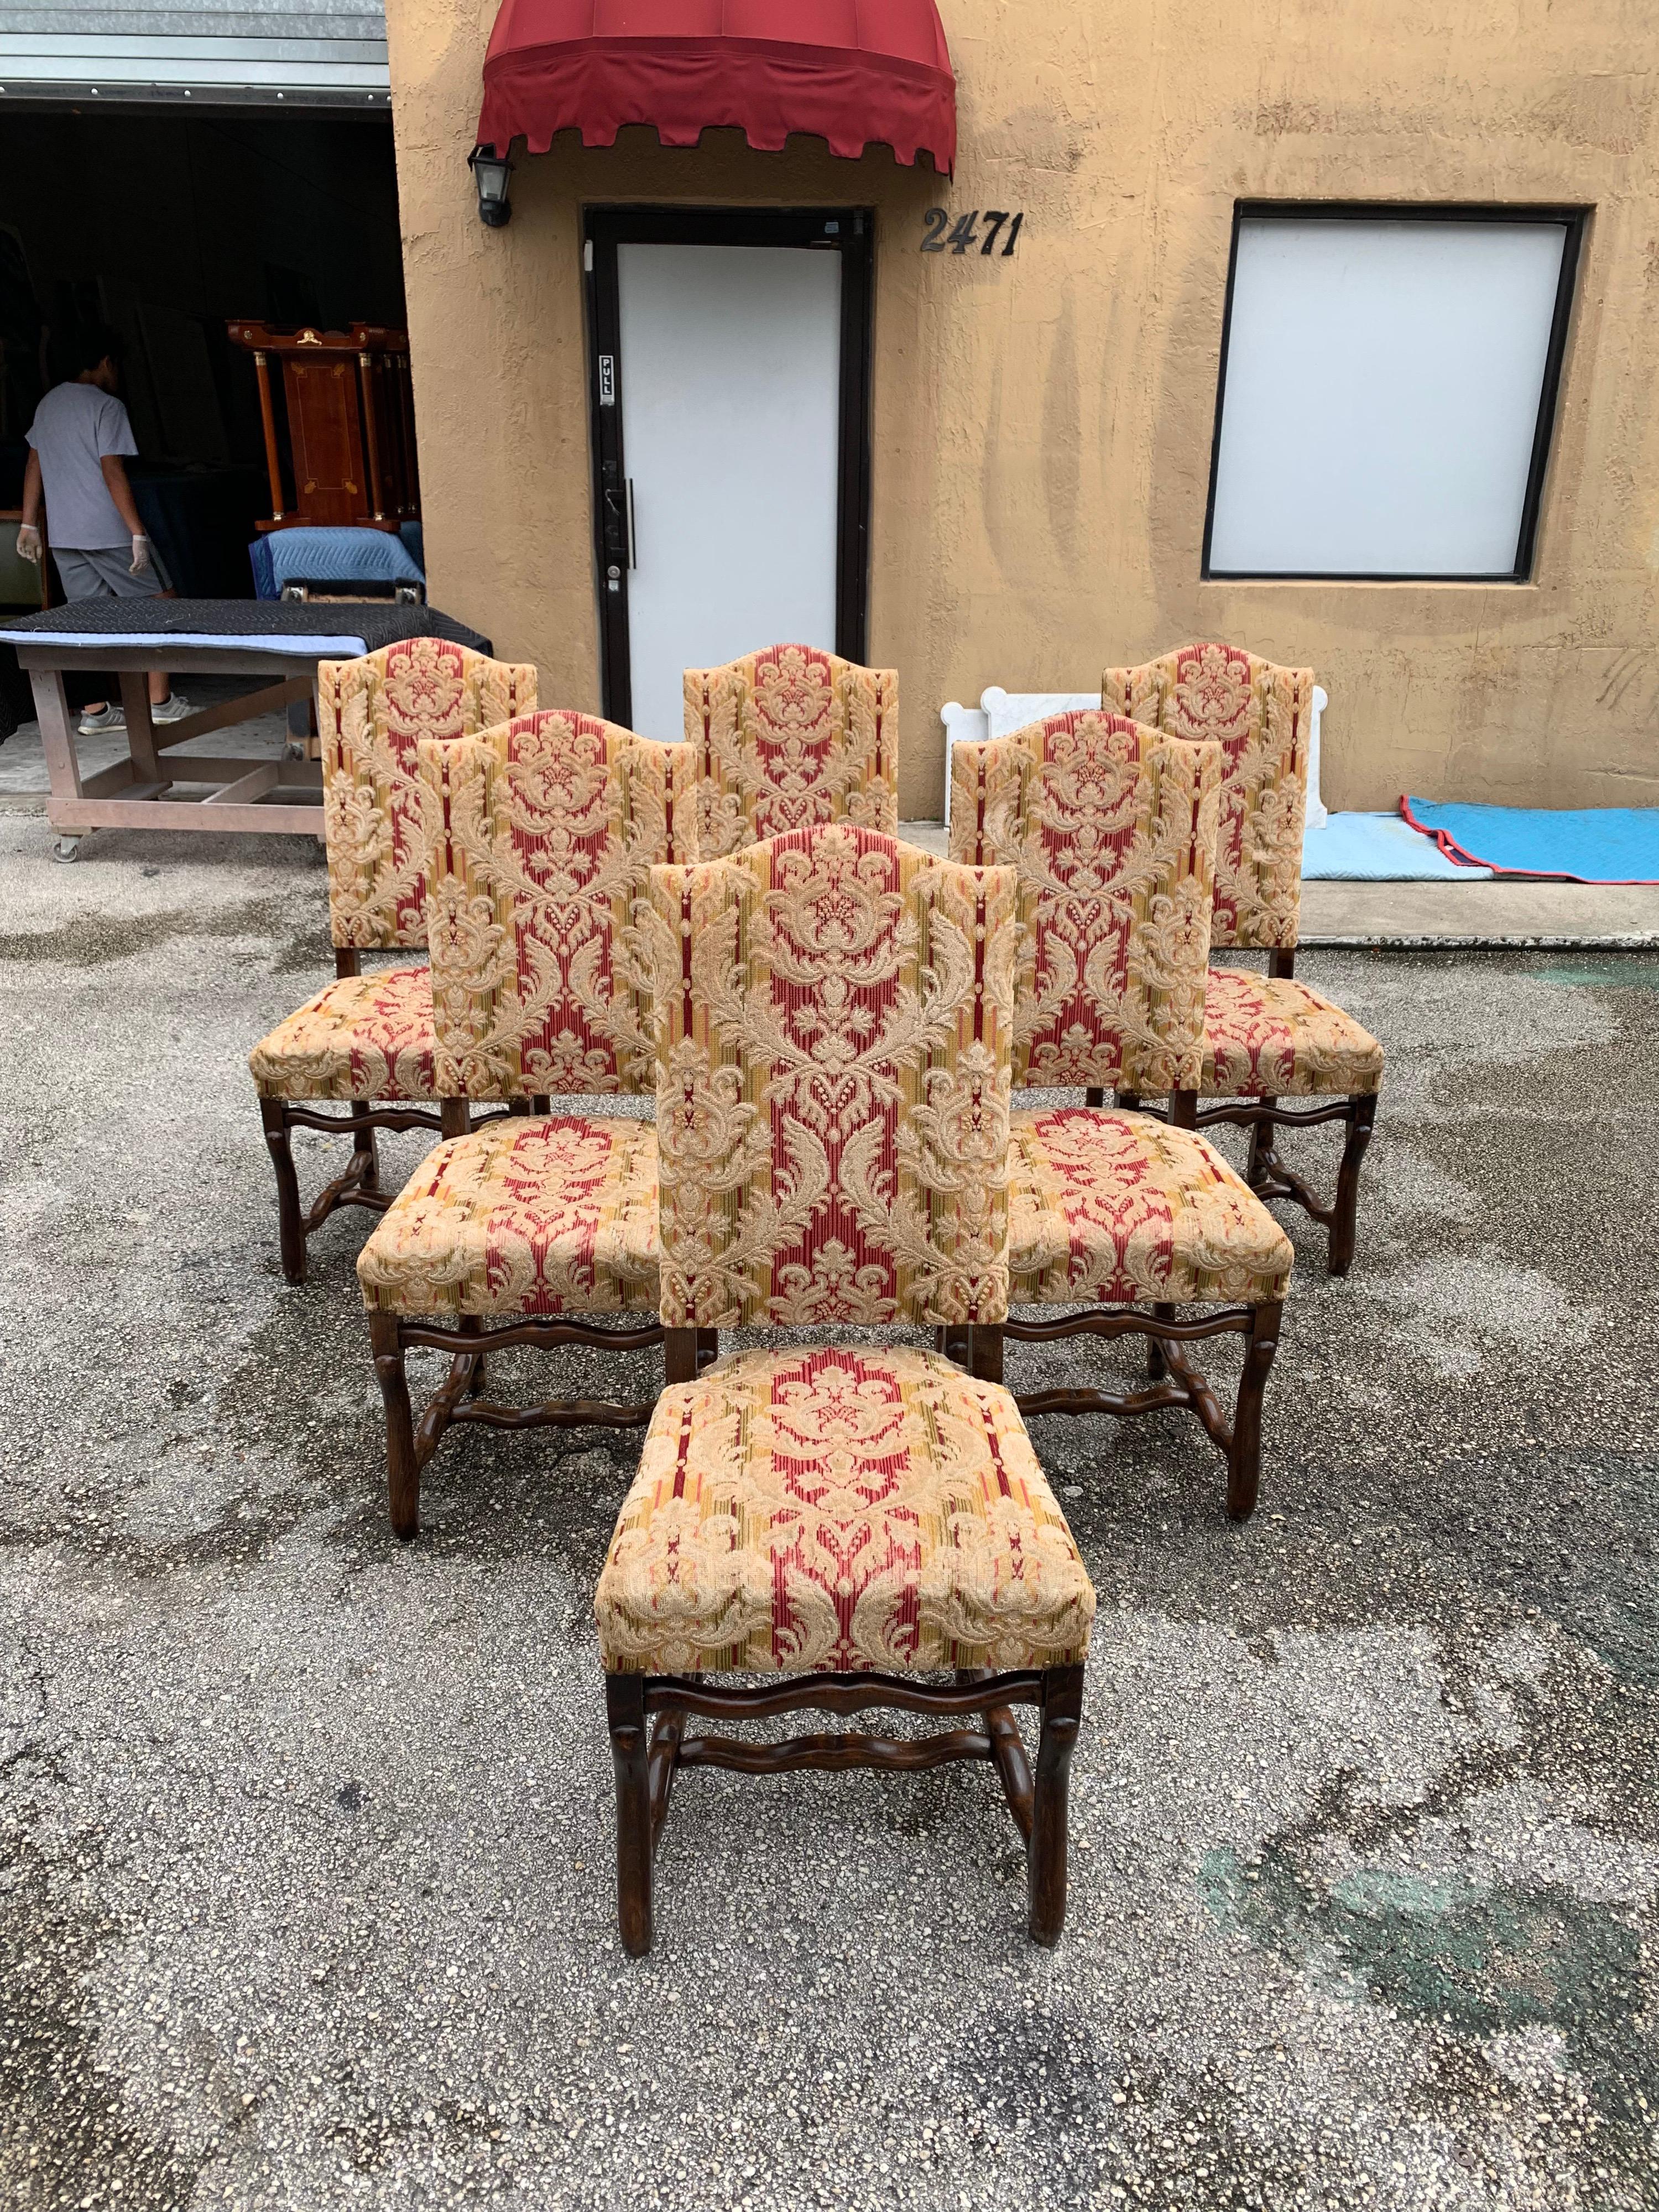 Fine set of 6 Louis XIII style Os de Mouton dining chairs with chapeau de gendarme backs, circa 1900s. Vintage fabric upholstery with nailheads, this solid walnut chair frames are in excellent condition. From South France. (Fabric is original period